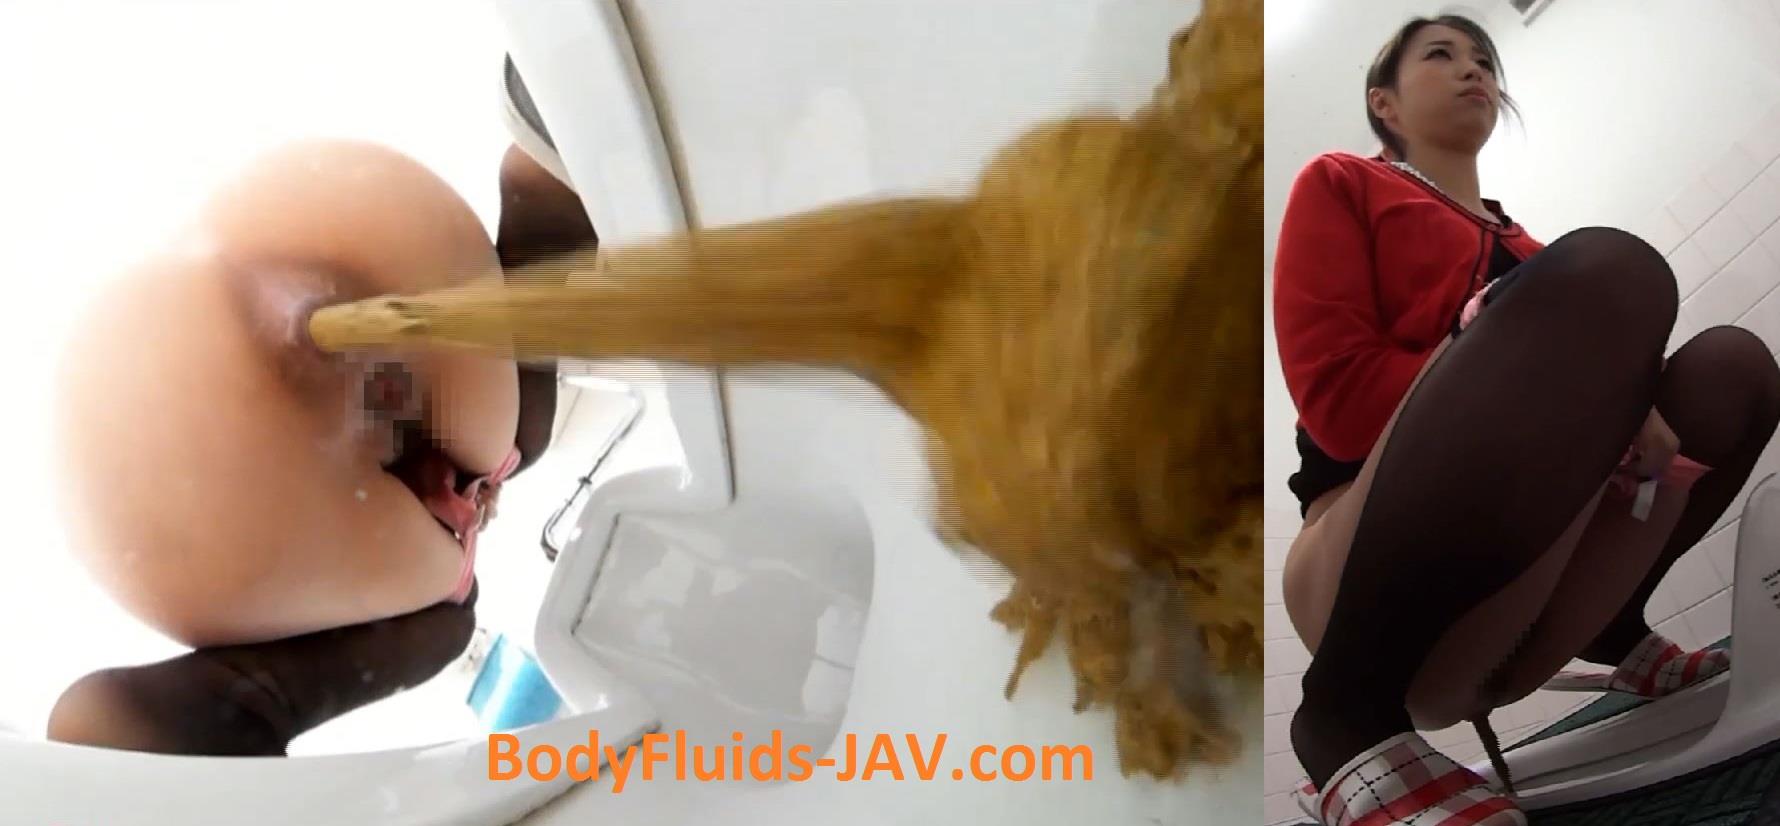 BFFF-128 Girls excretions huge pile shit in toilet. (HD 1080p)